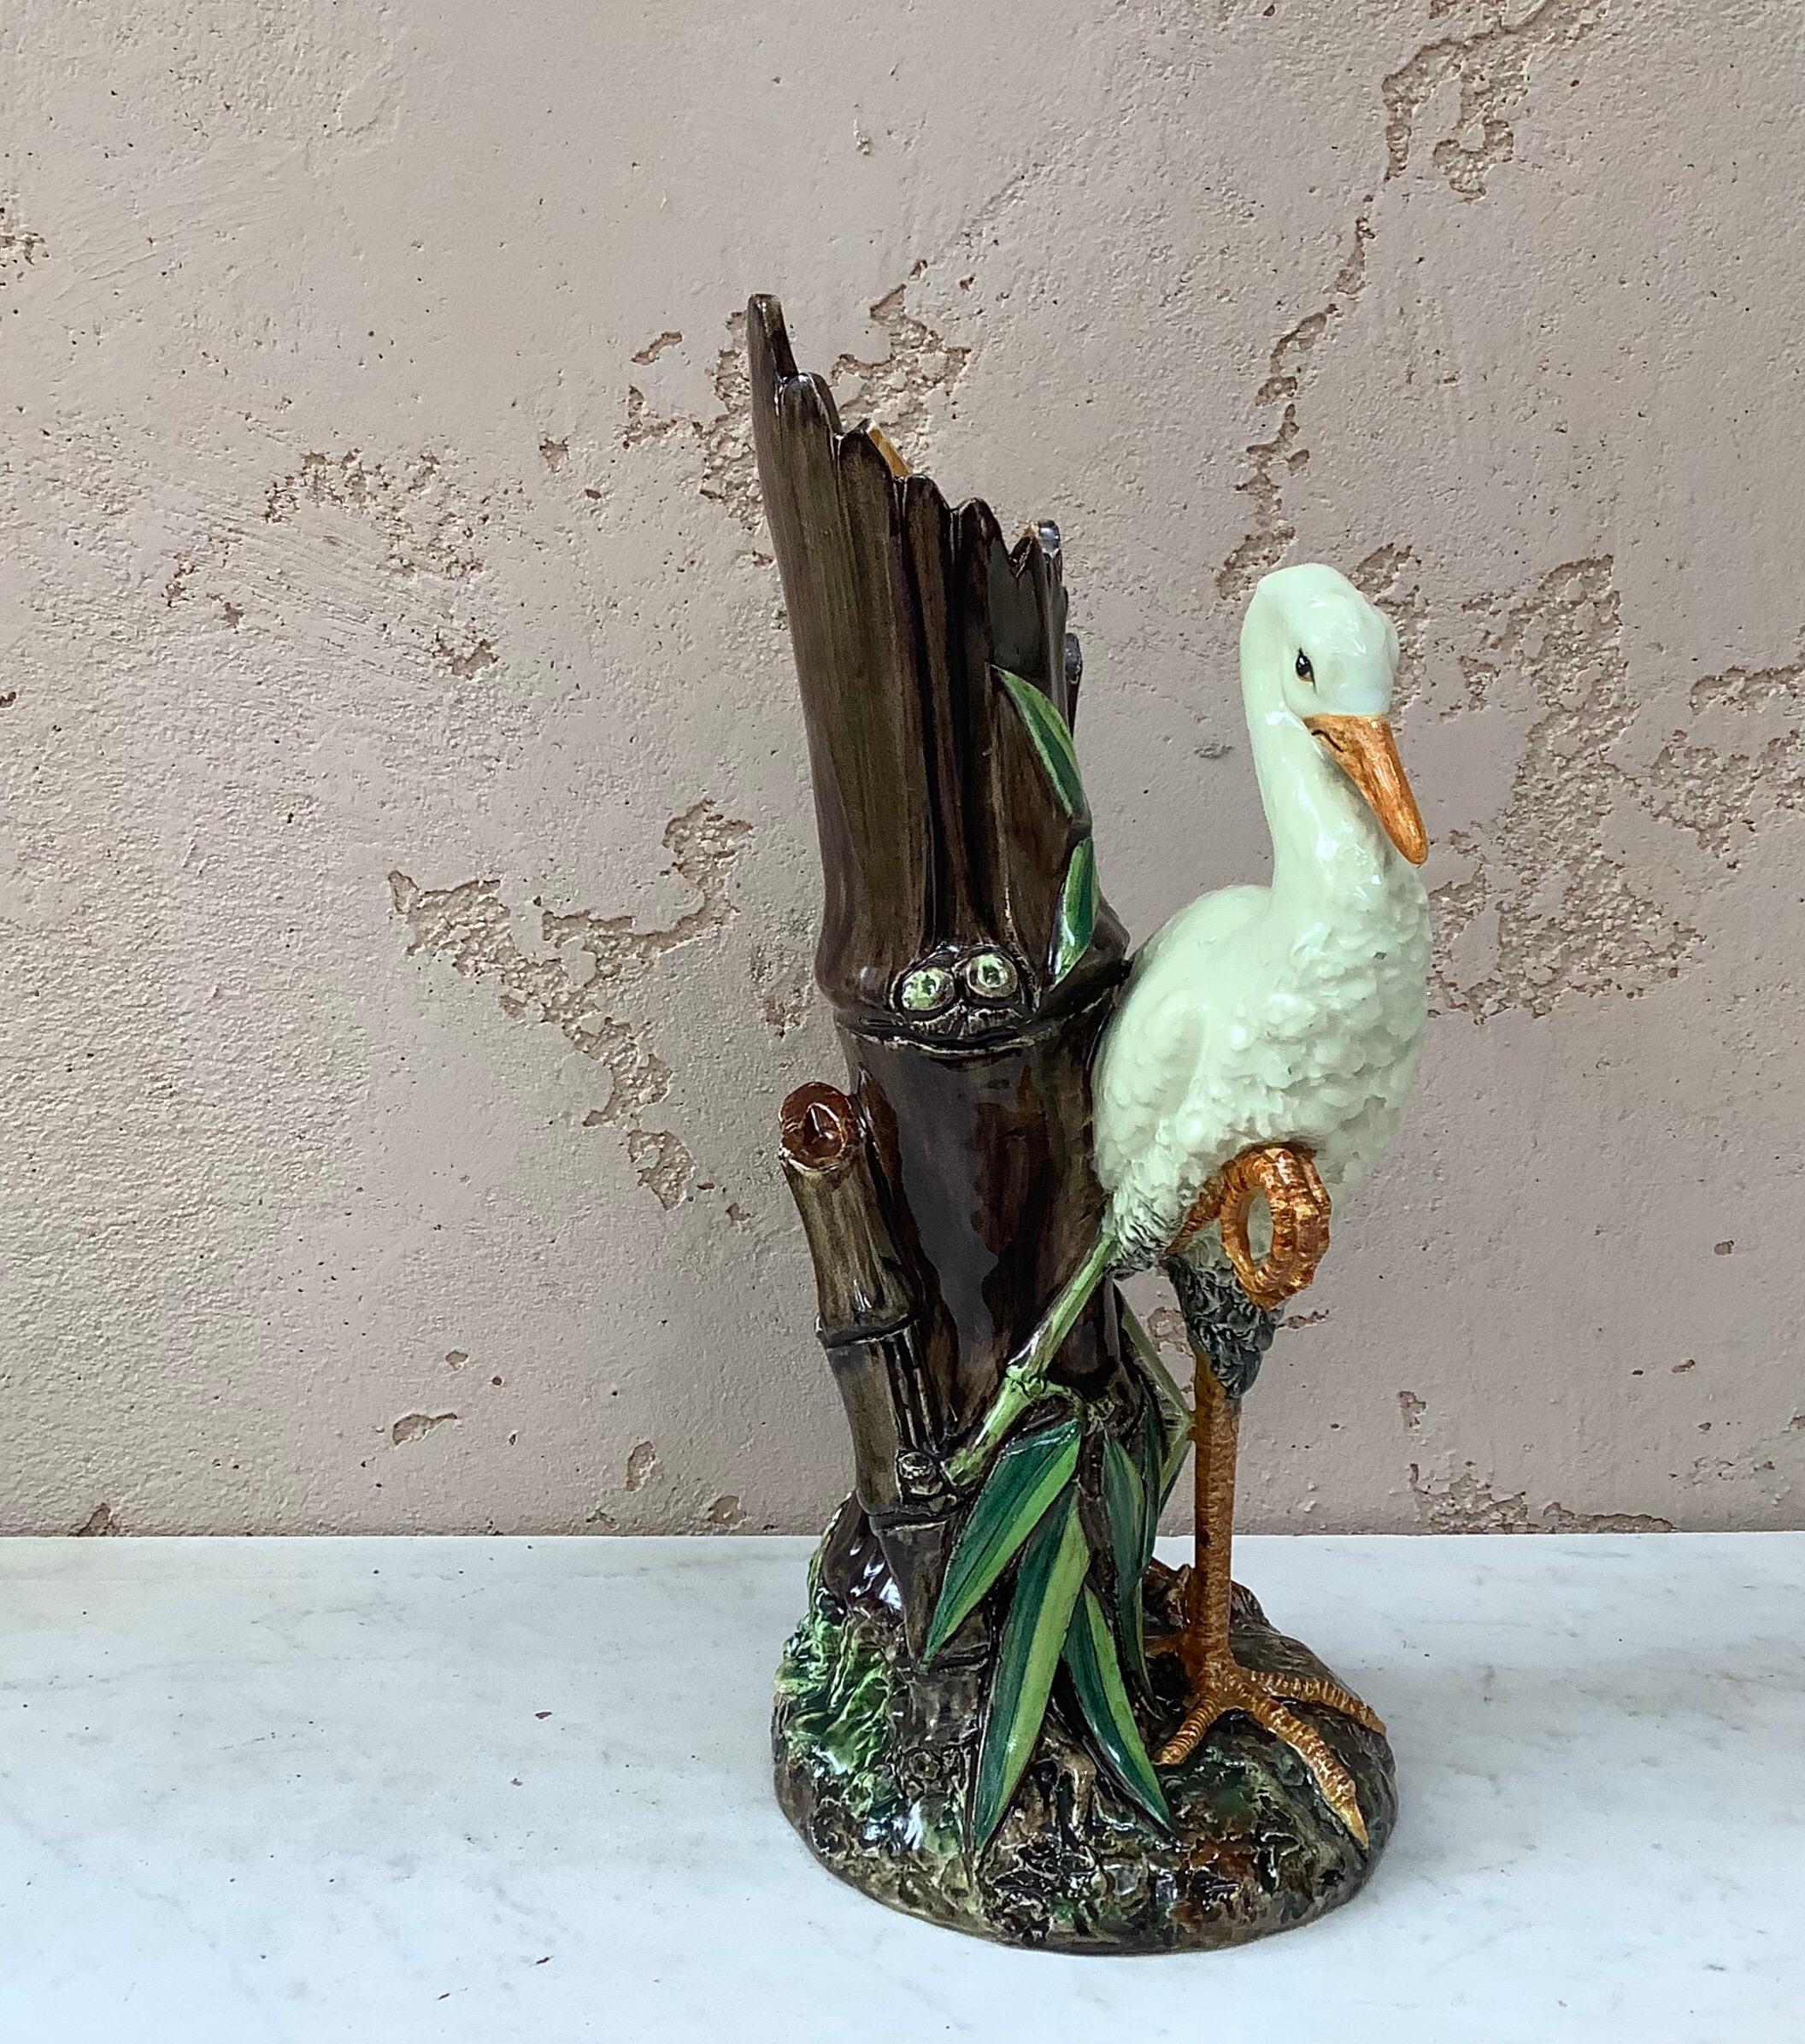 Elegant and rare Majolica stork with a bamboo vase signed Delphin Massier, circa 1890.
The Massier are known for the quality of their unique enamels and paintings. The Massier family excelled in the representation of all animals at the end of 19th